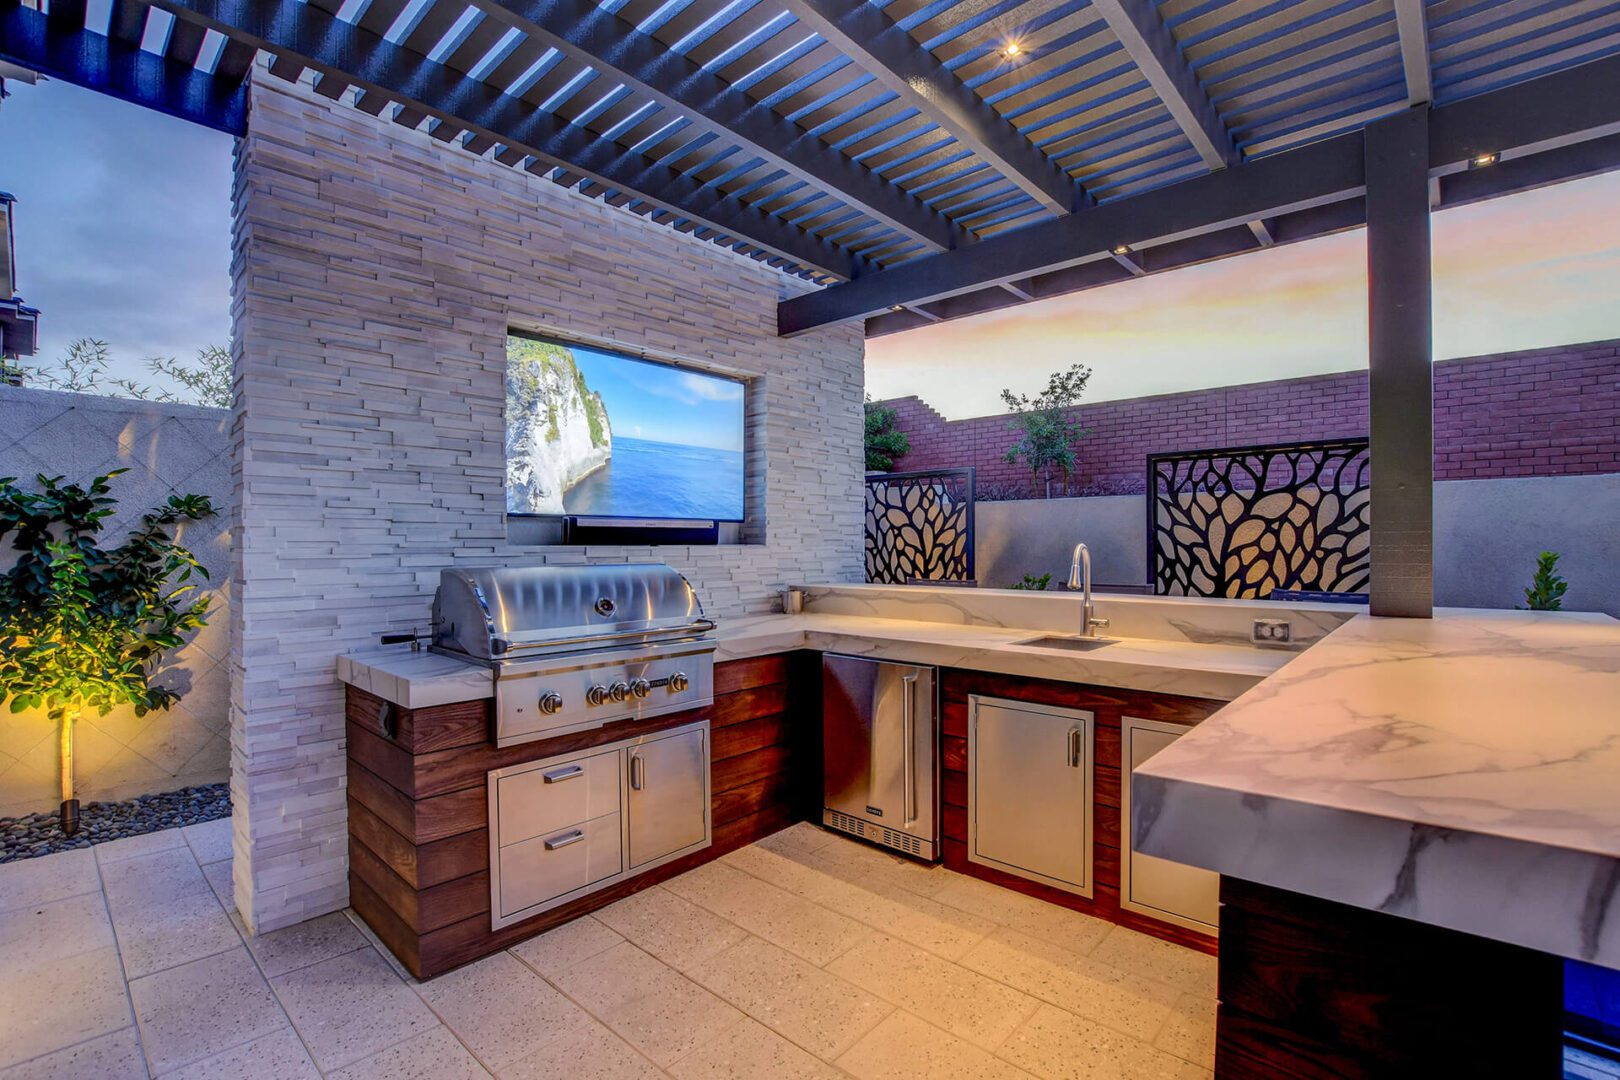 A kitchen with an oven and television on the wall.